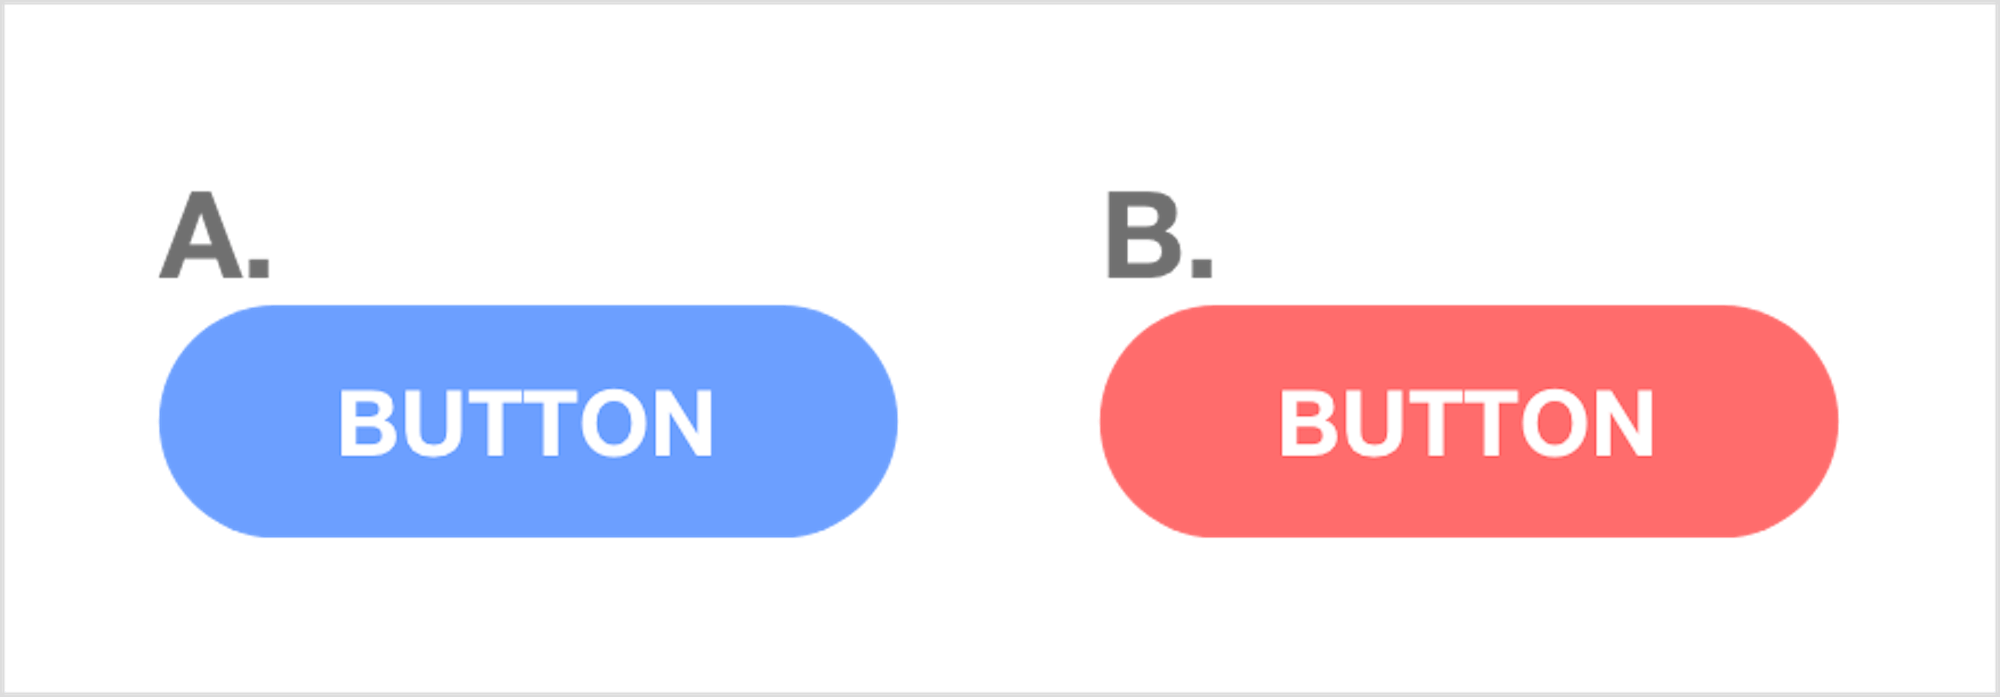 A/B testing with a blue button and red button